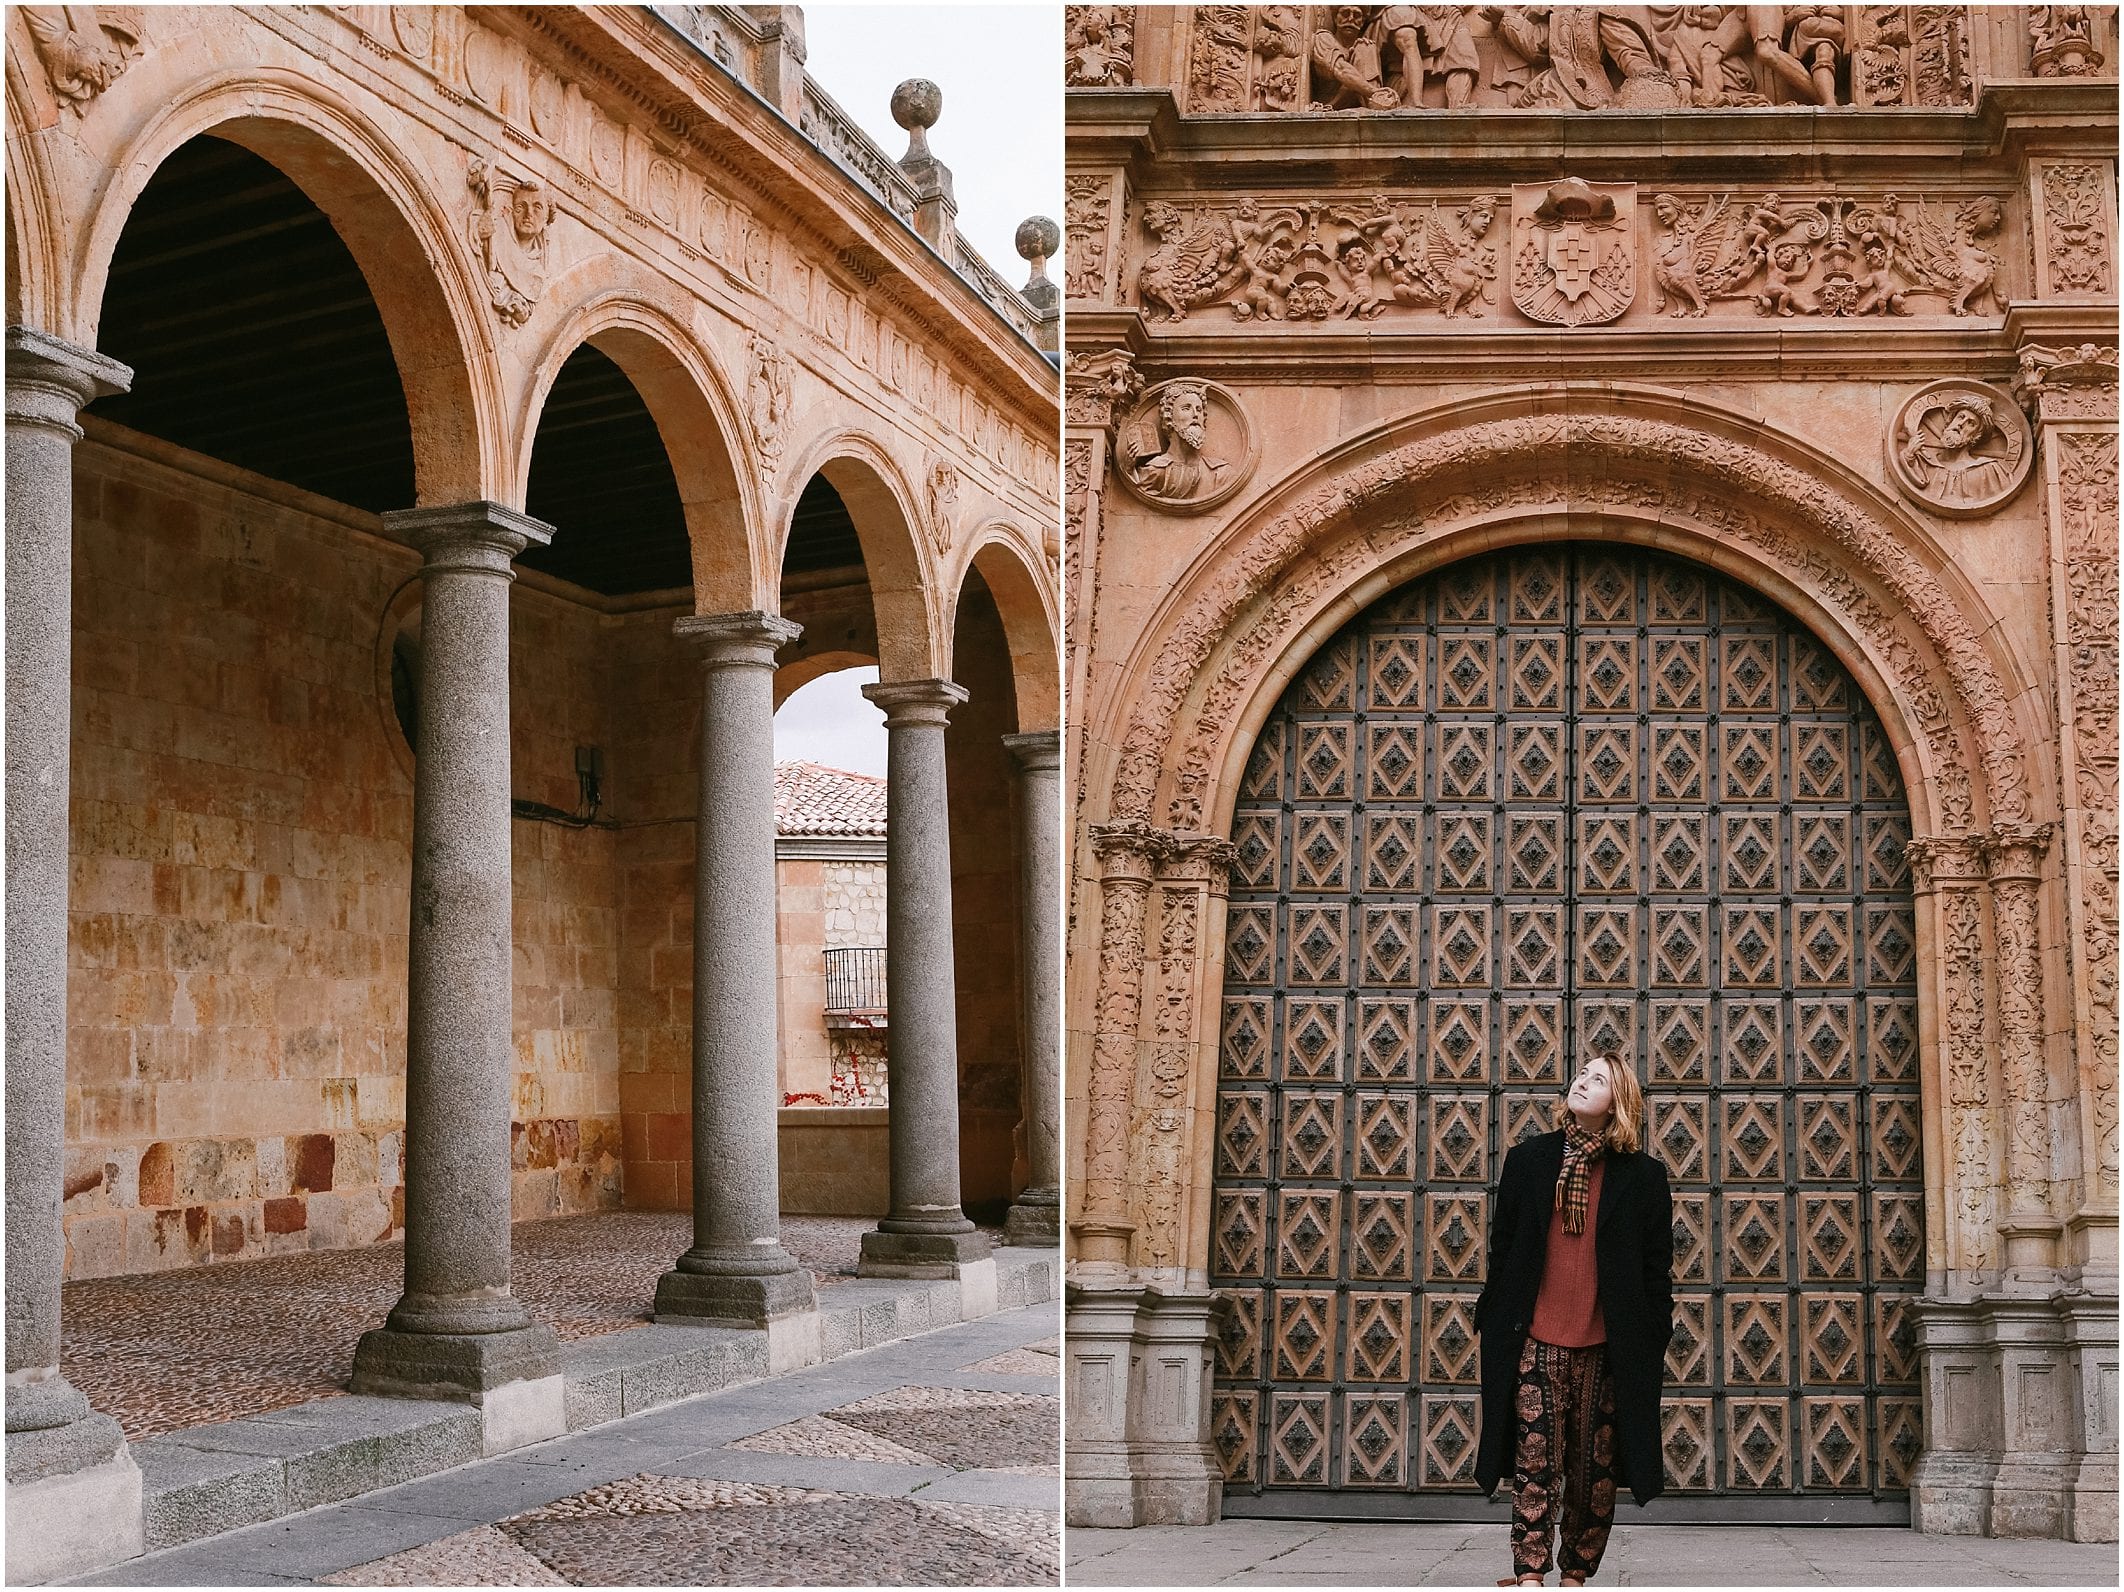 5 Most Underrated Small Cities in Spain You Must Visit! Salamanca, Caceres, Cordoba, Granada, Aranjez - Photographer / blogger Helena Woods